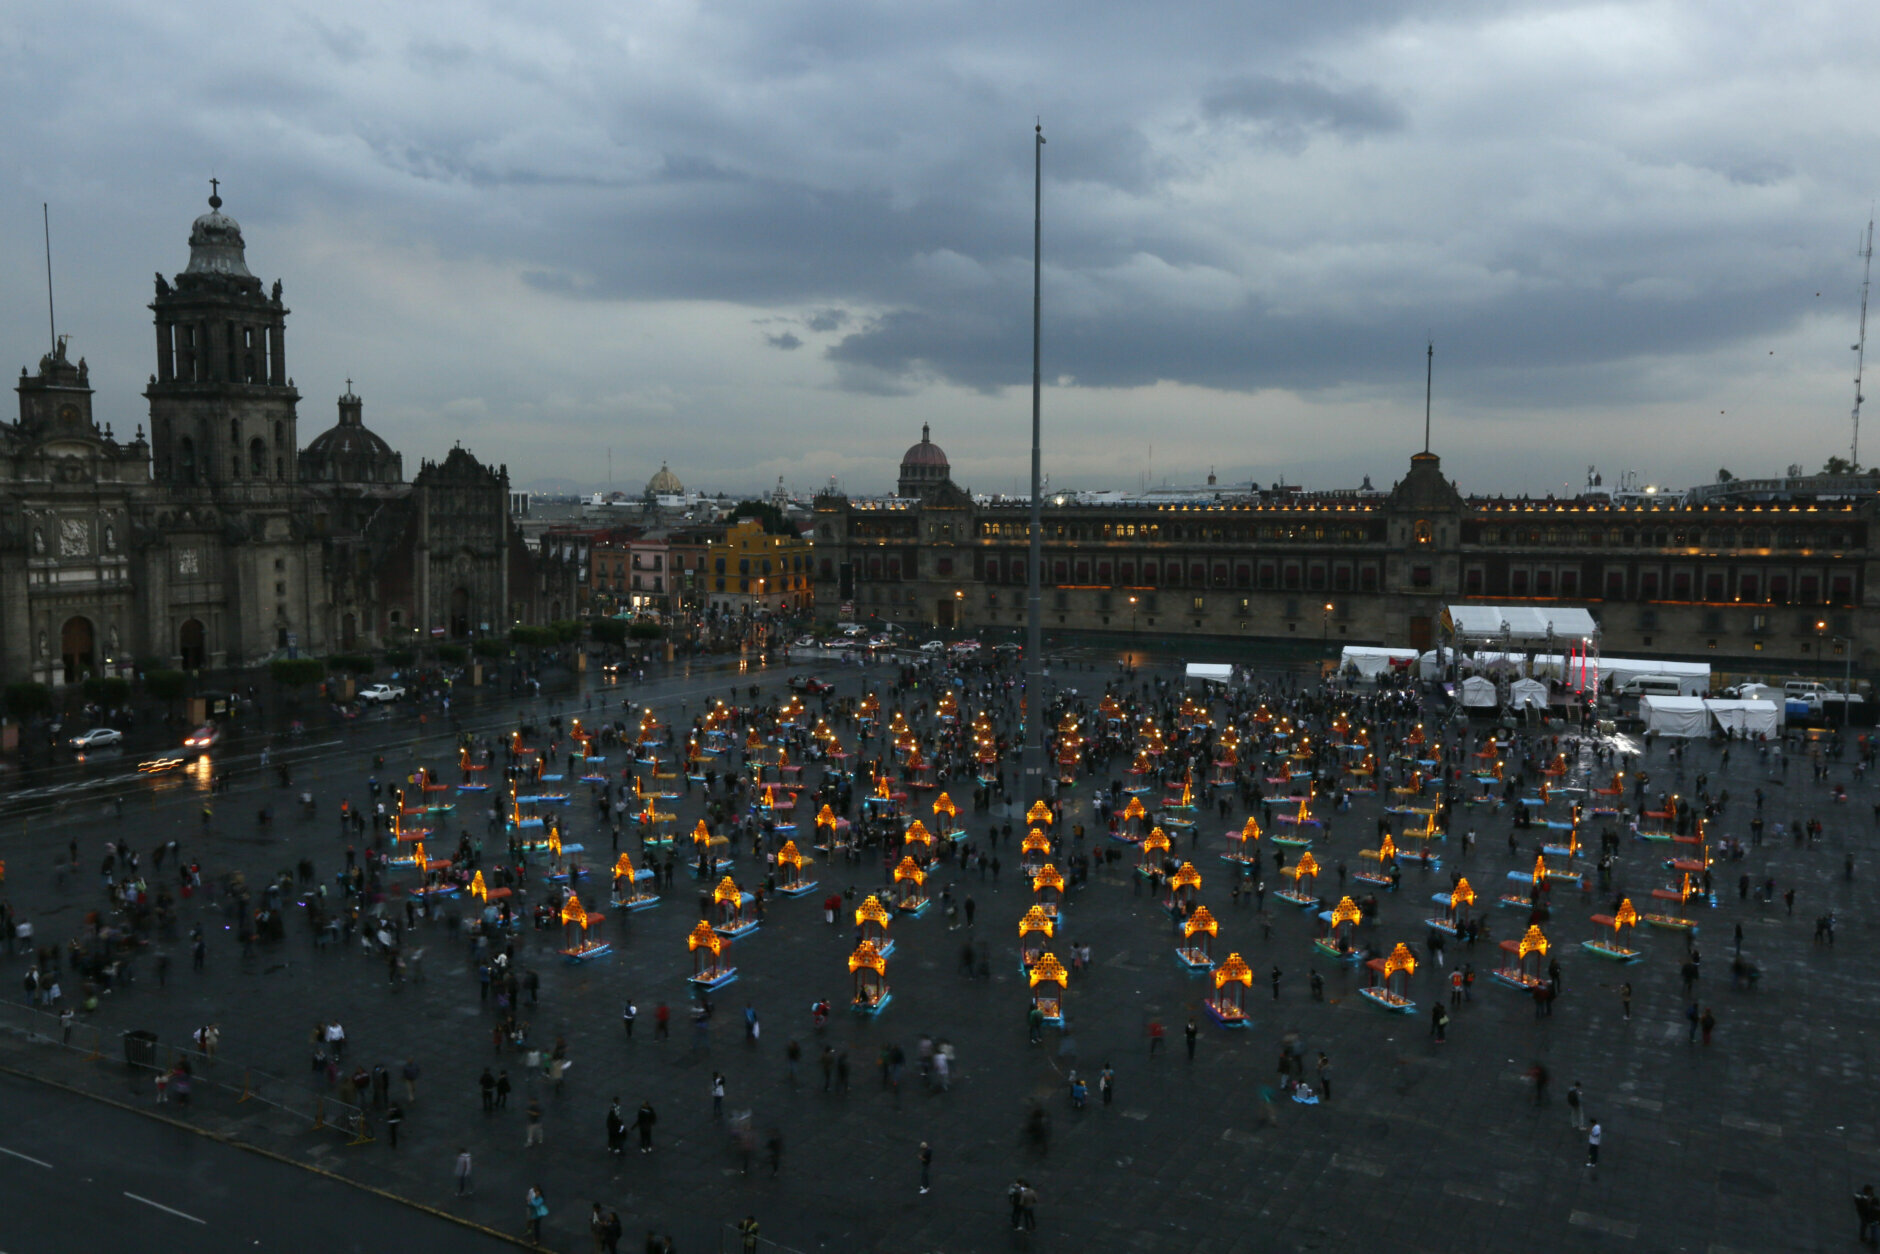 Representations of boats known as "trajineras" are on display in Mexico City's main square, the Zocalo, as part of the Day of the Dead festivities in Mexico City, Monday, Oct. 31, 2016. The holiday honors the dead as friends and families gather in cemeteries to decorate their loved ones' graves and hold vigil through the night on Nov. 1 and 2. (AP Photo/Moises Castillo)